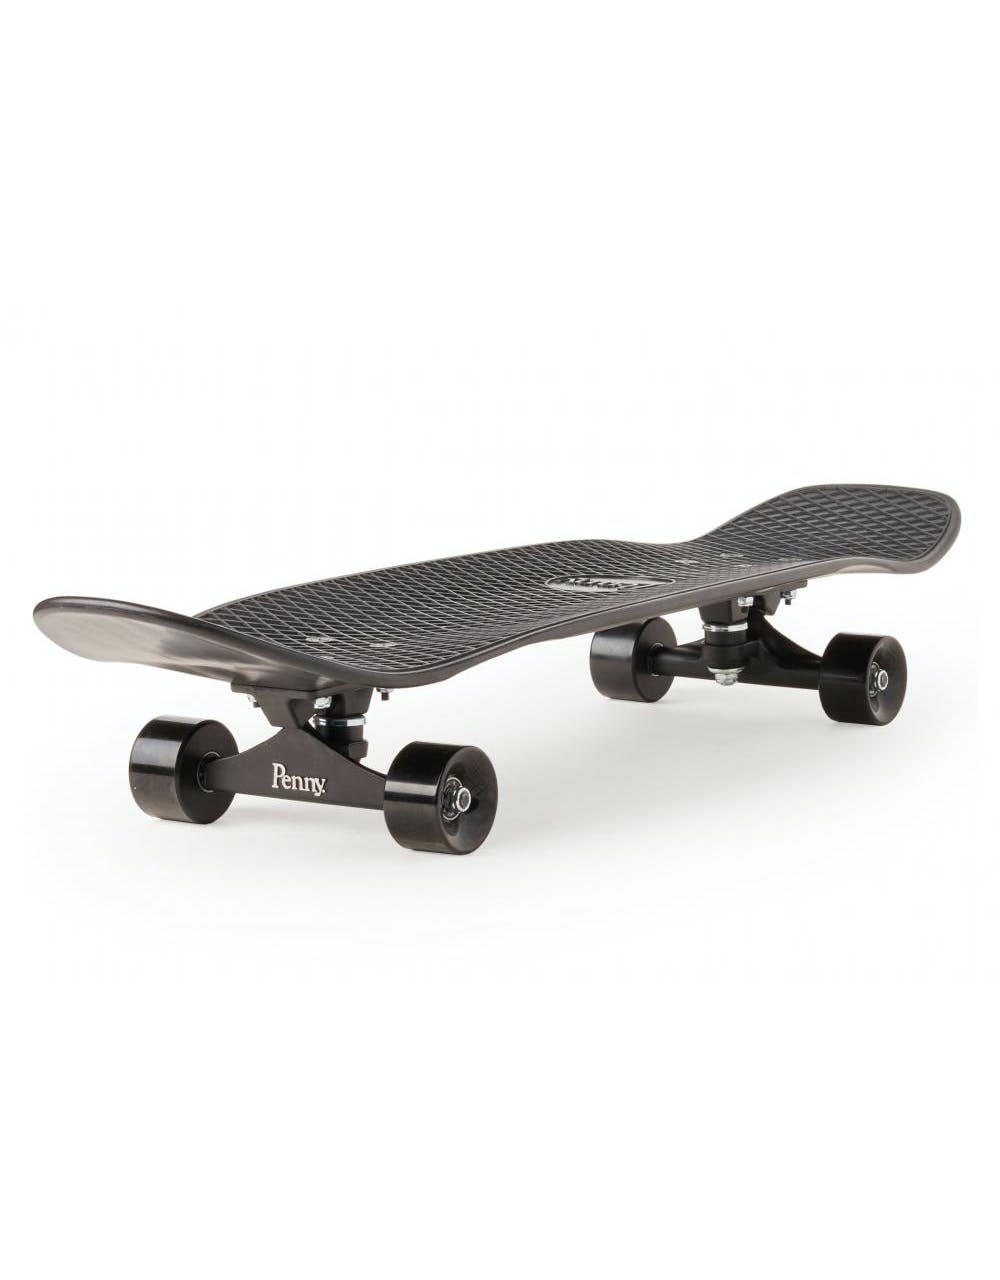 Penny Skateboards Classic Concave Cruiser - 32" - Blackout